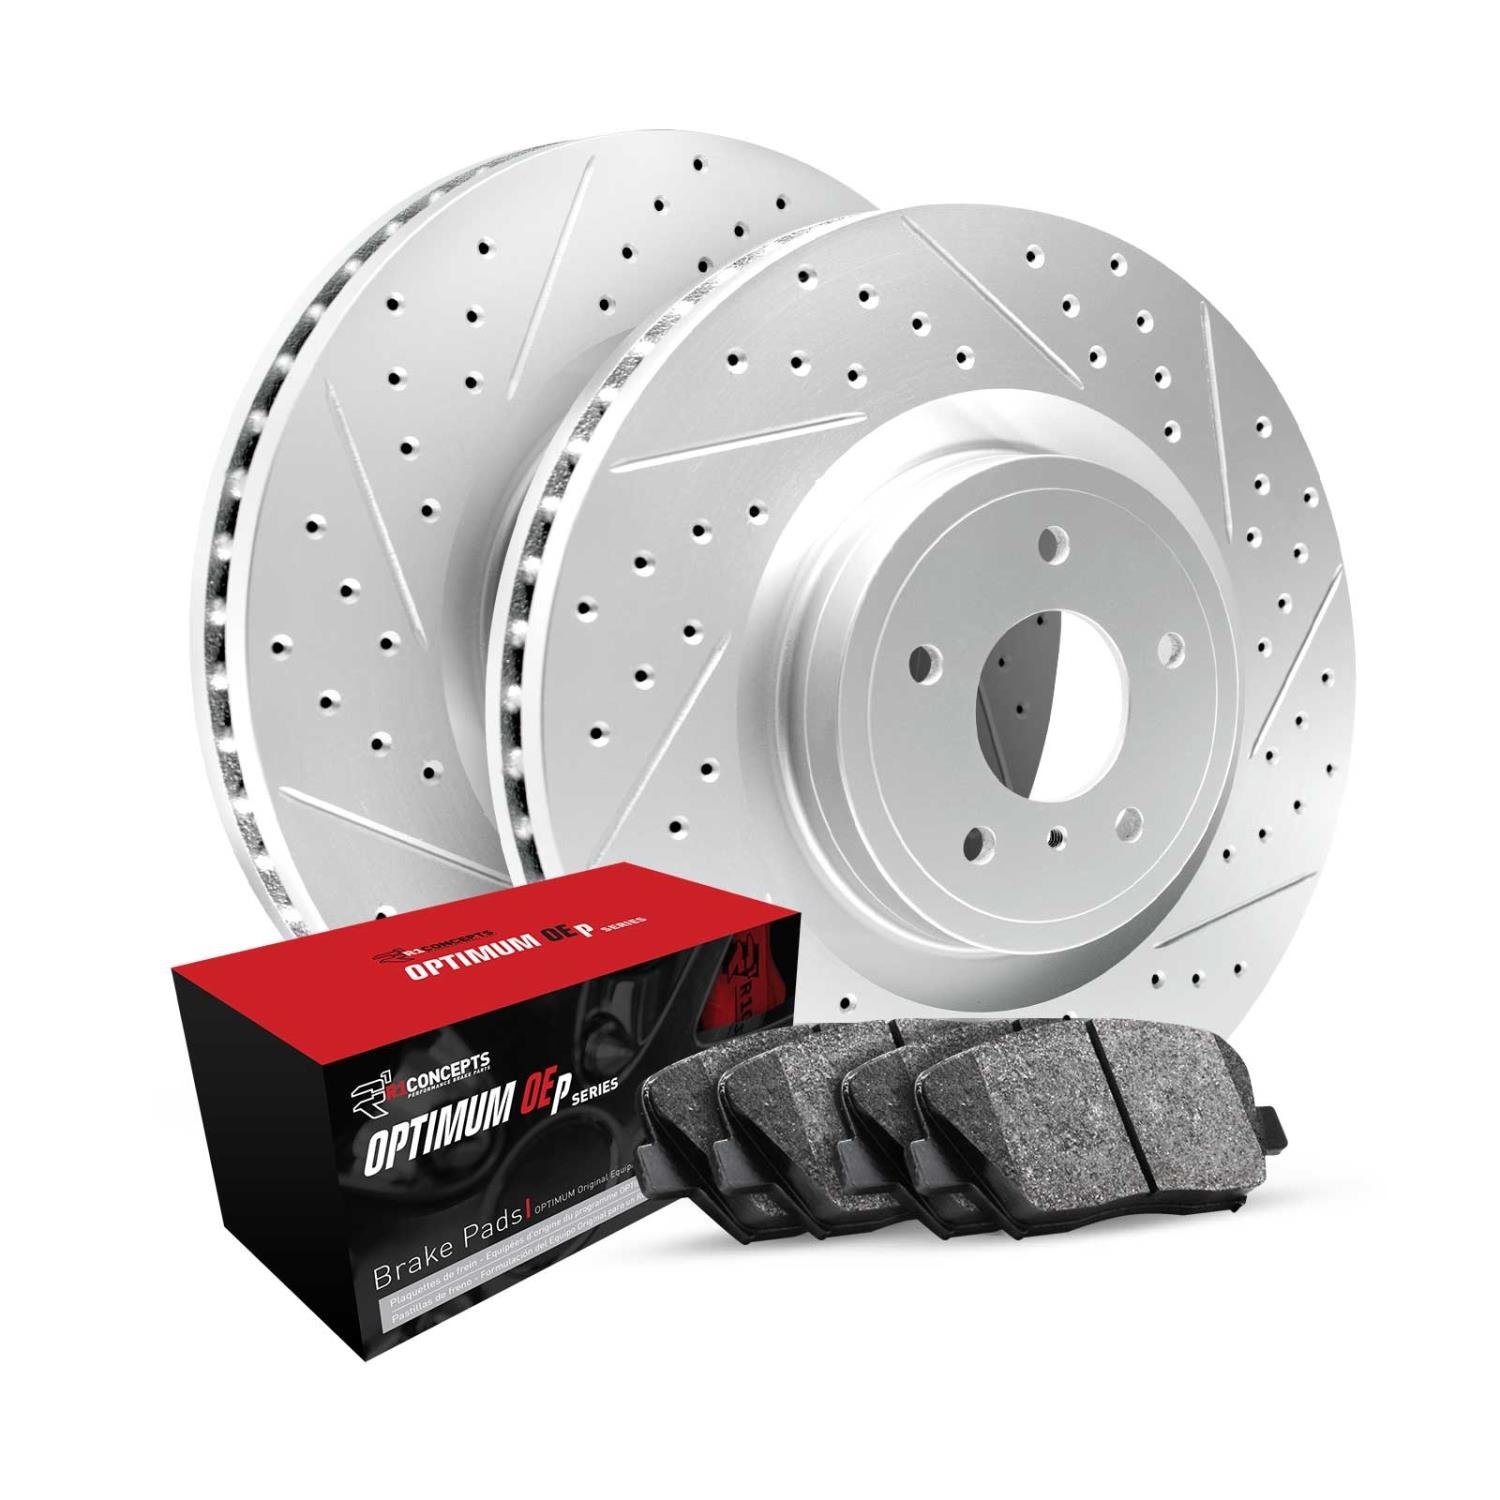 GEO-Carbon Drilled & Slotted Brake Rotor Set w/Optimum OE Pads, 2003-2011 Ford/Lincoln/Mercury/Mazda, Position: Front & Rear